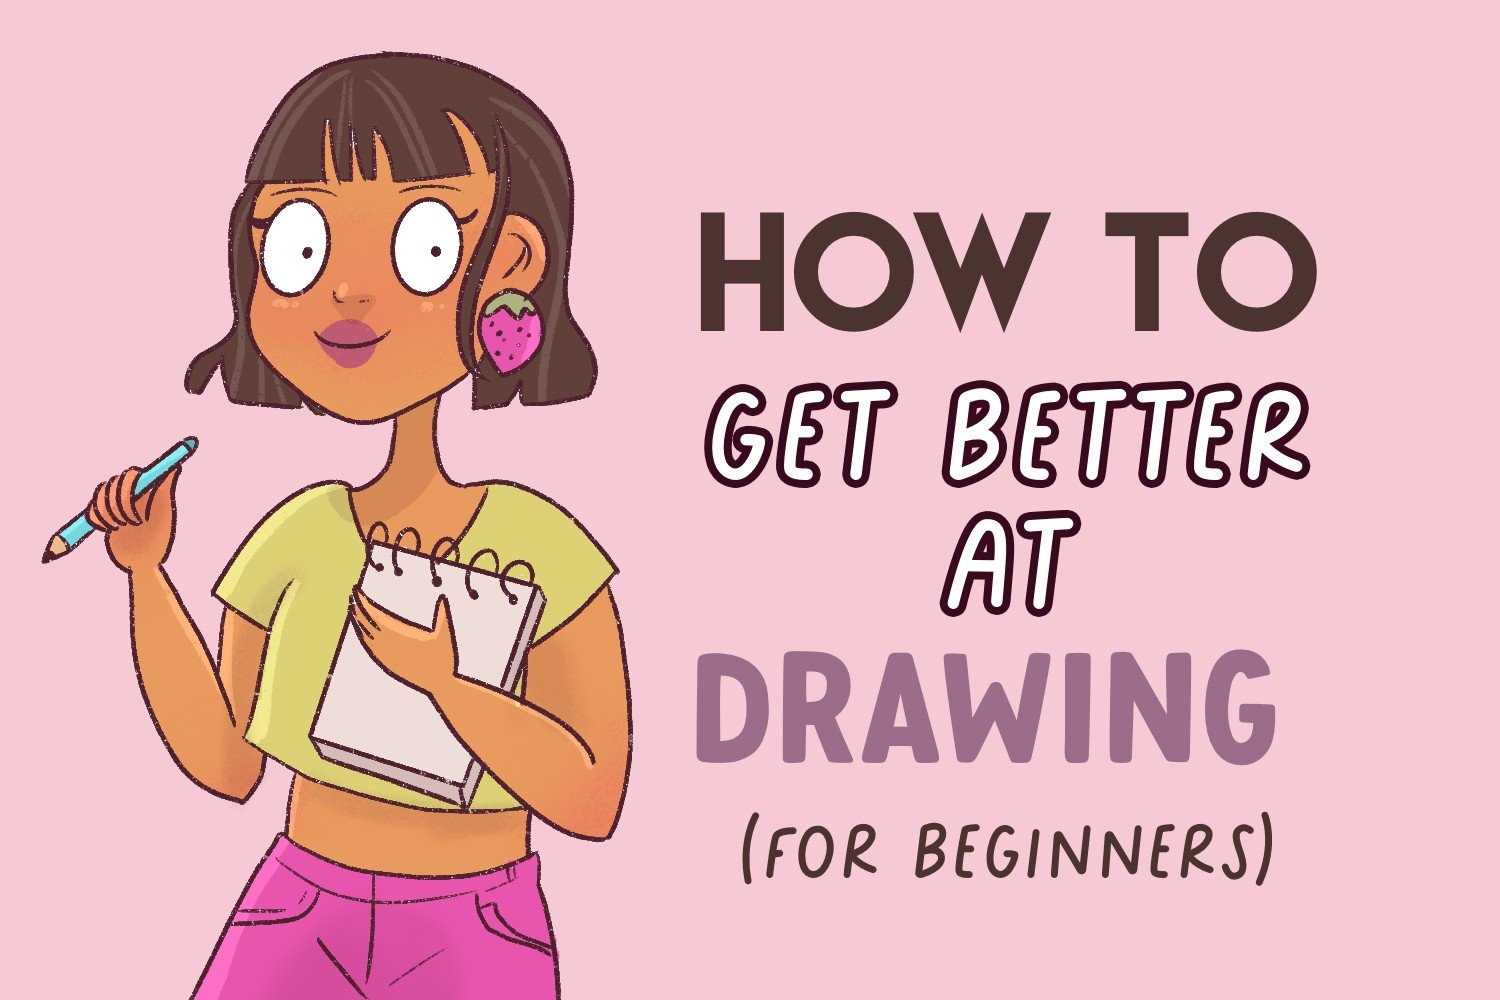 How to get Better at Drawing (for Beginners) - Draw Cartoon Style!